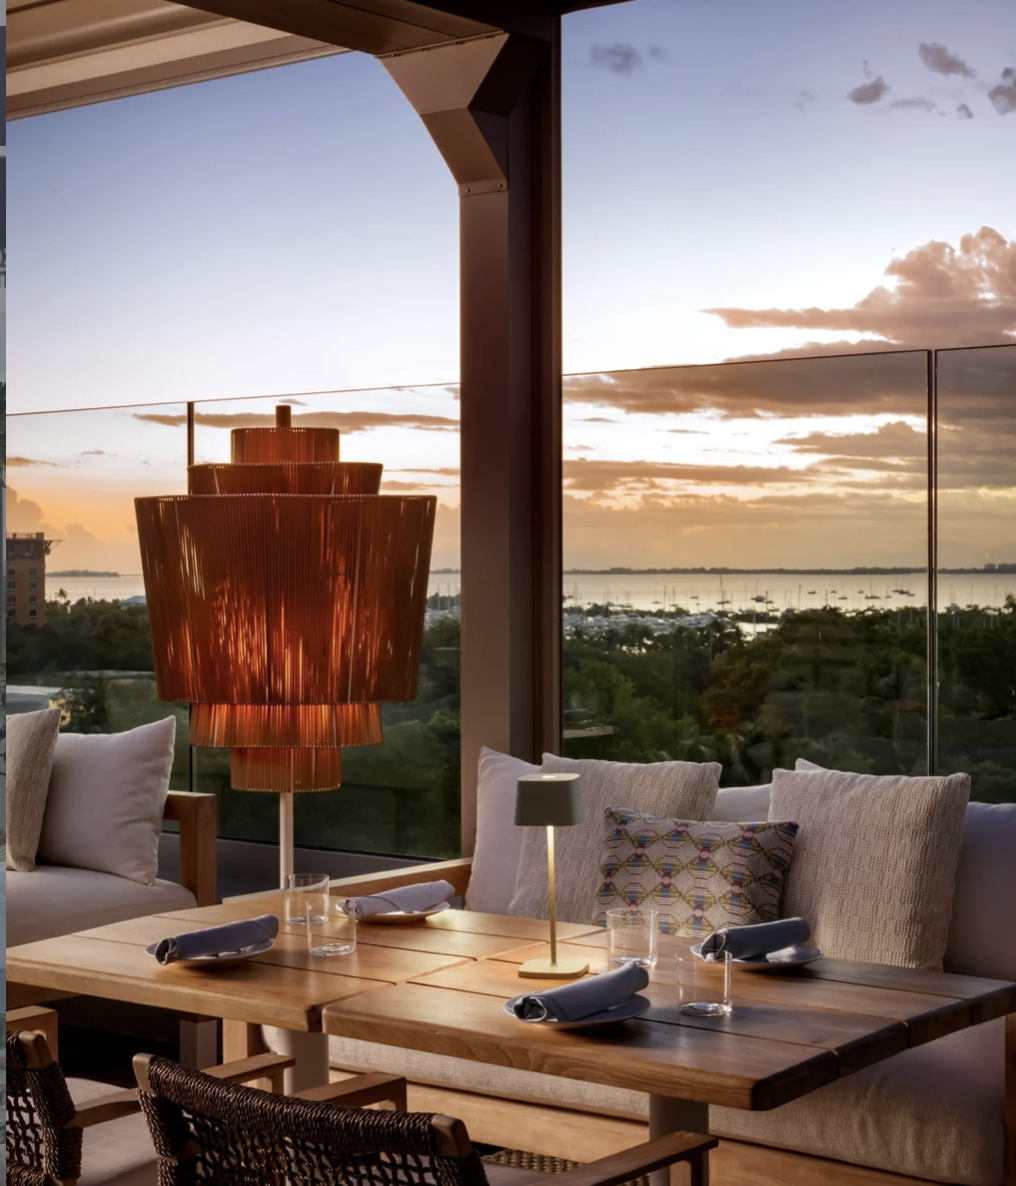 Introducing Level 6 by Amal in Coconut Grove